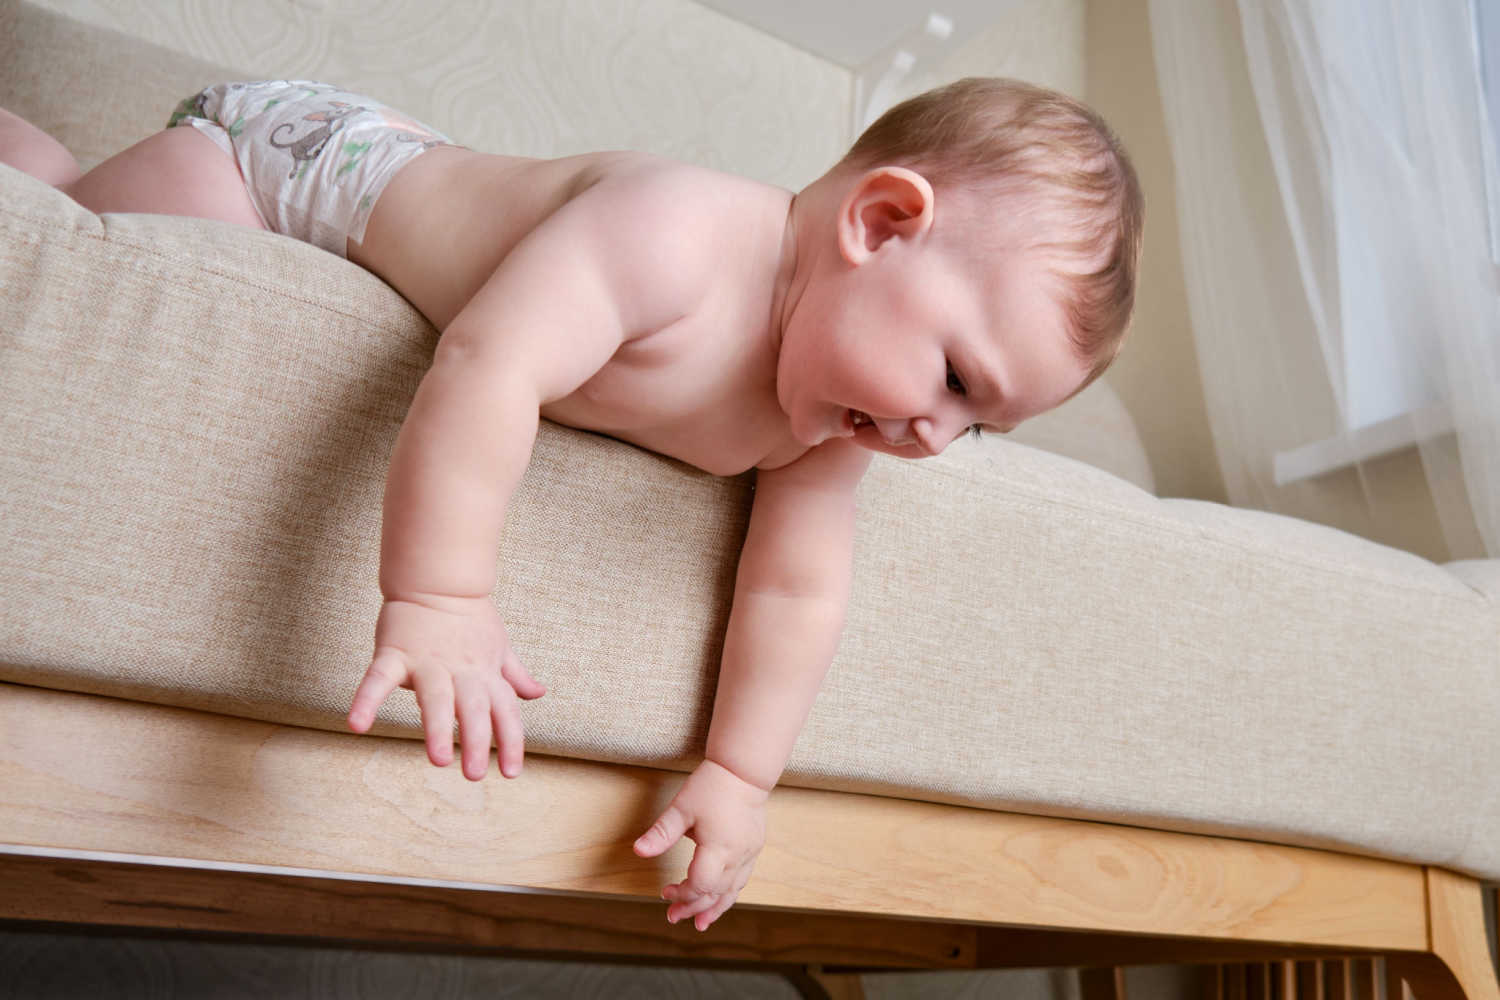 baby fall from sofa